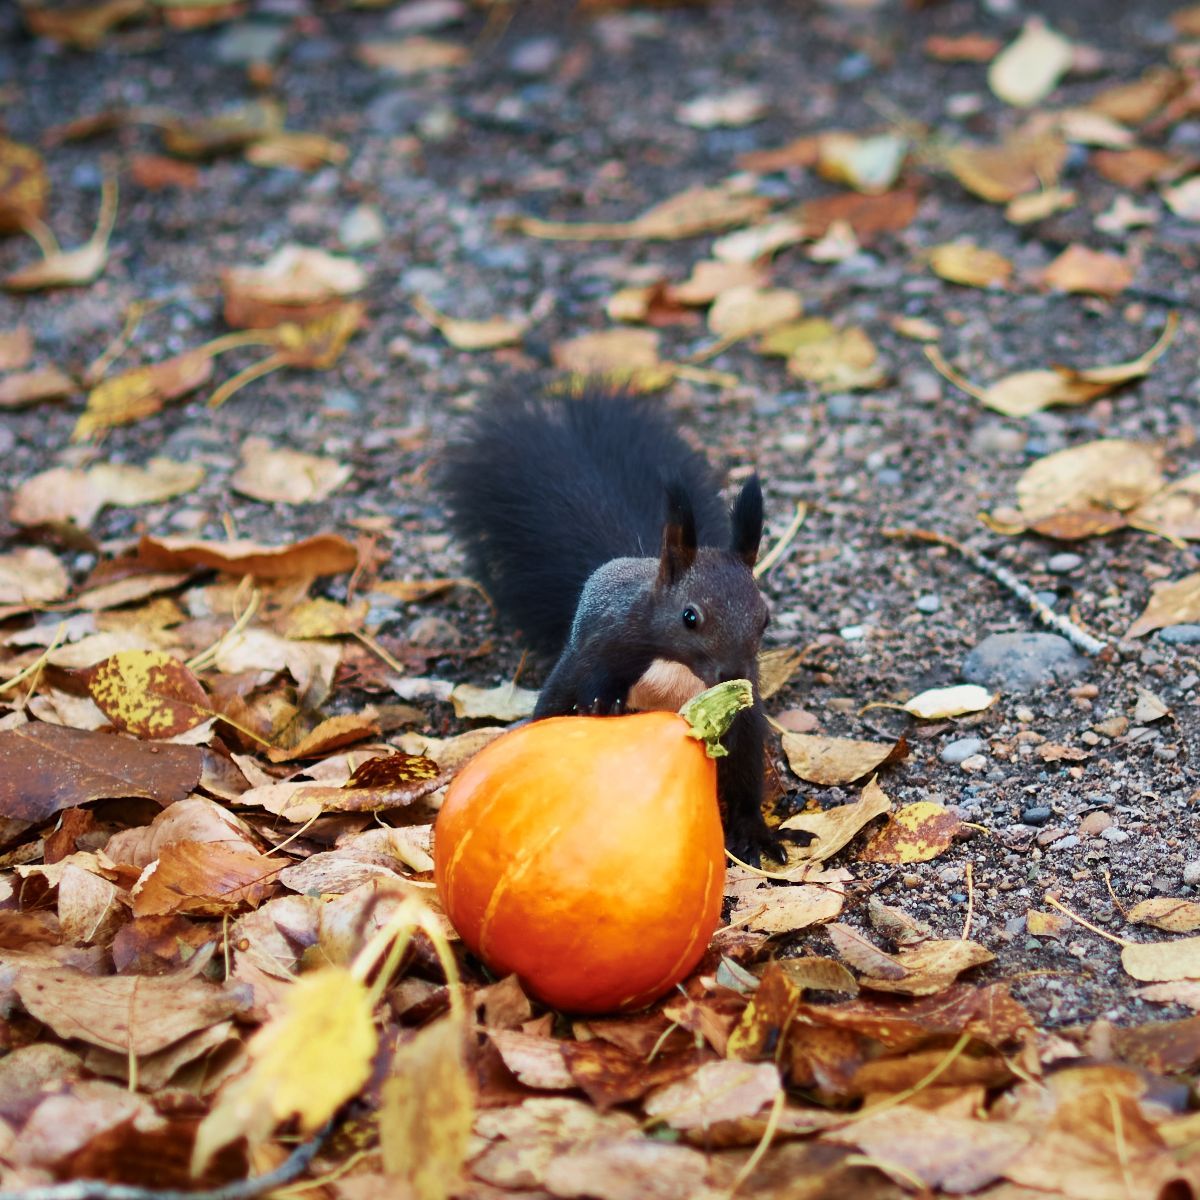 meaning a black squirrel crossing your path